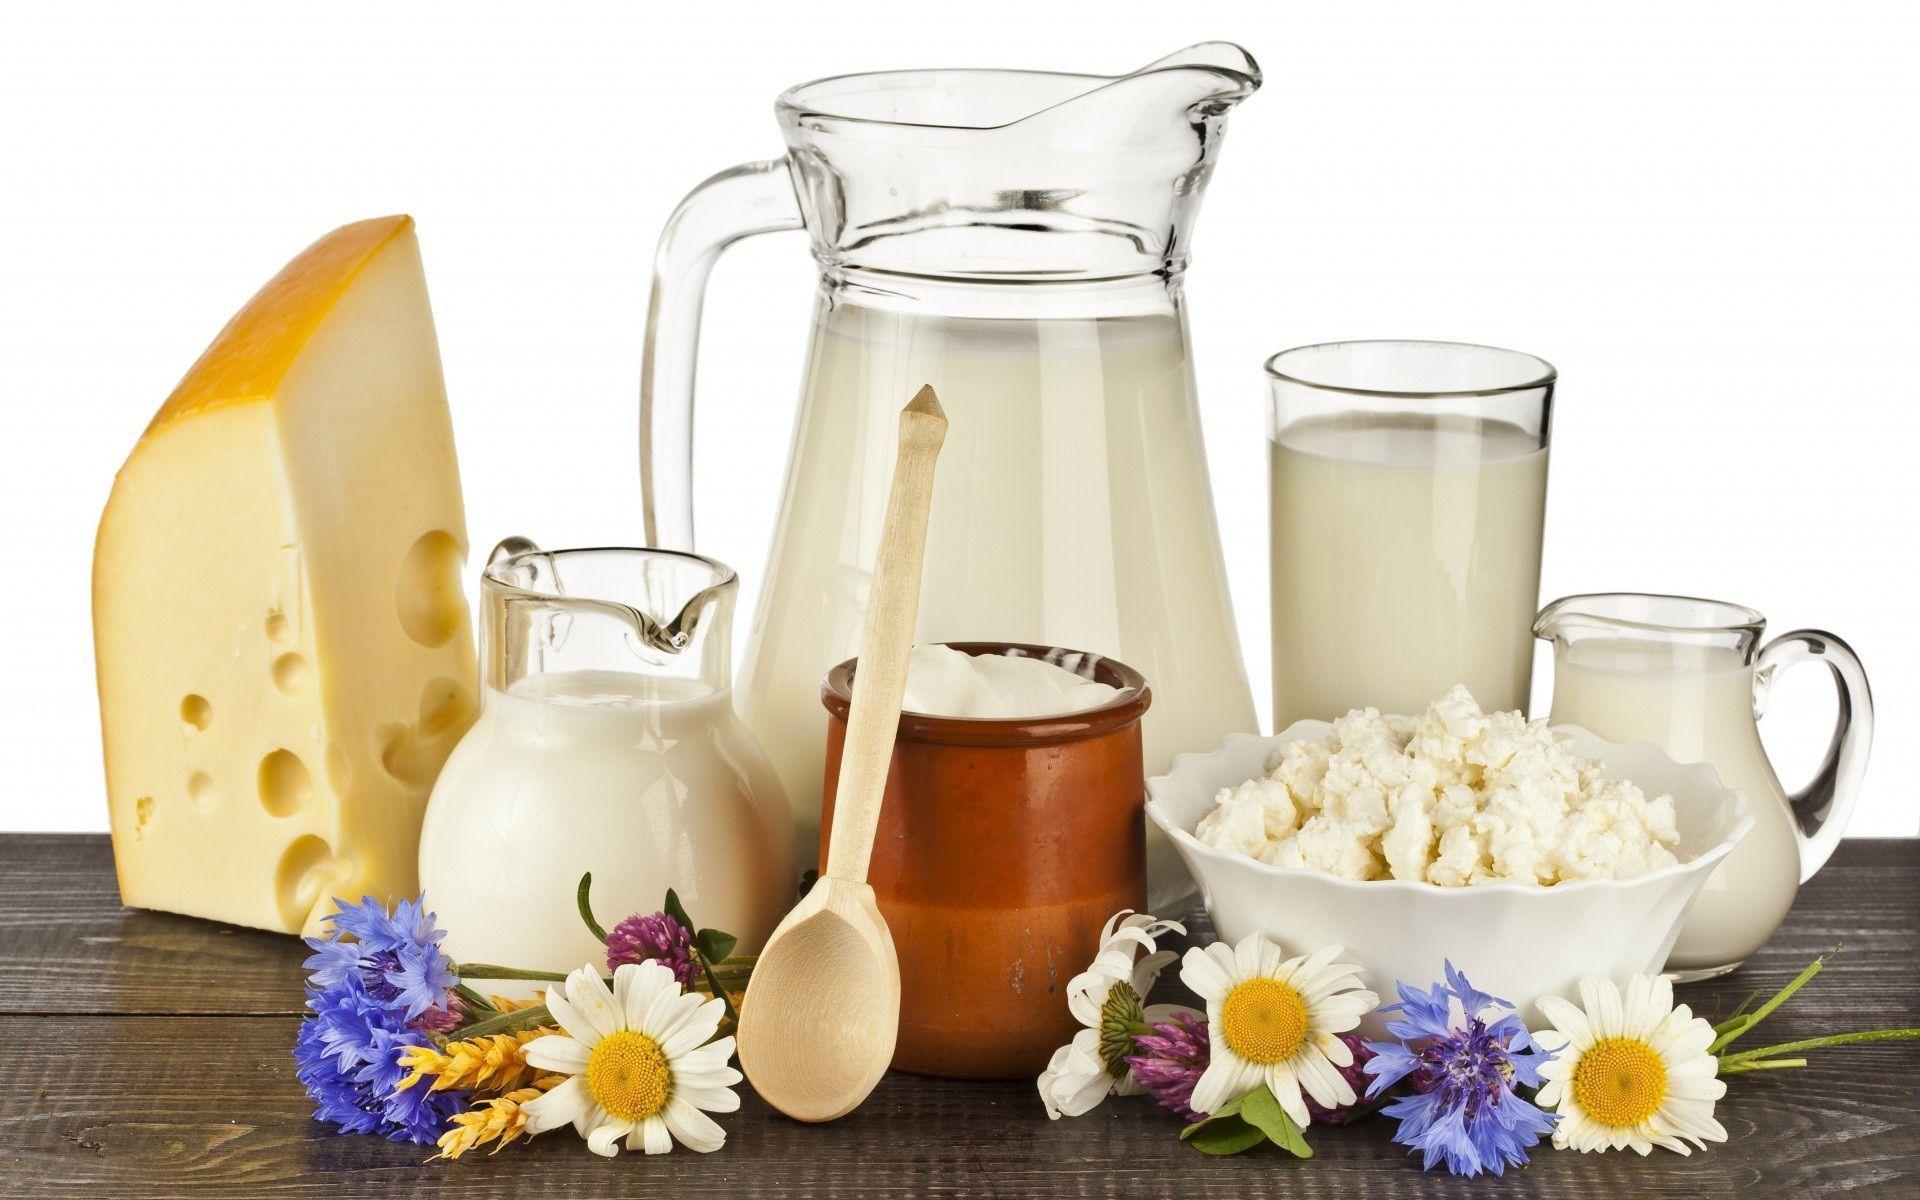 Dairy Products Image